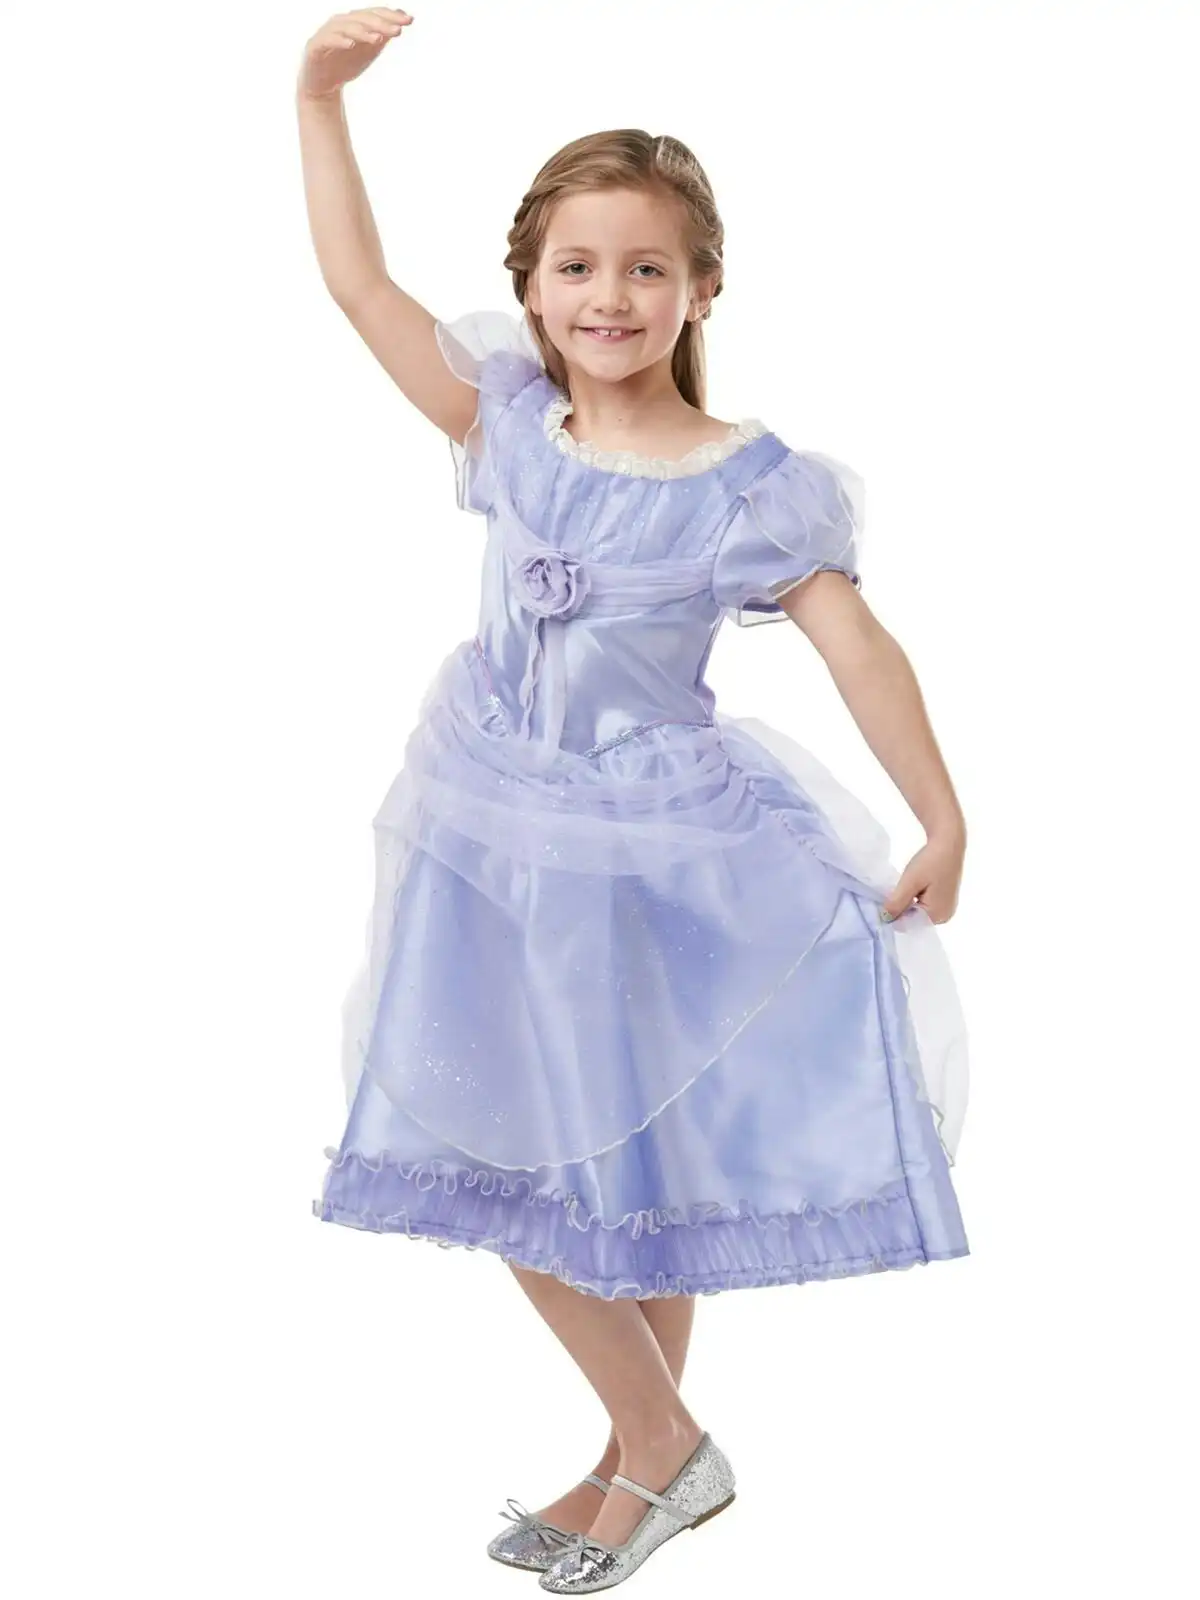 Disney Clara From The Nutcracker Deluxe Ballet Dress Up Party Costume Size 4-6